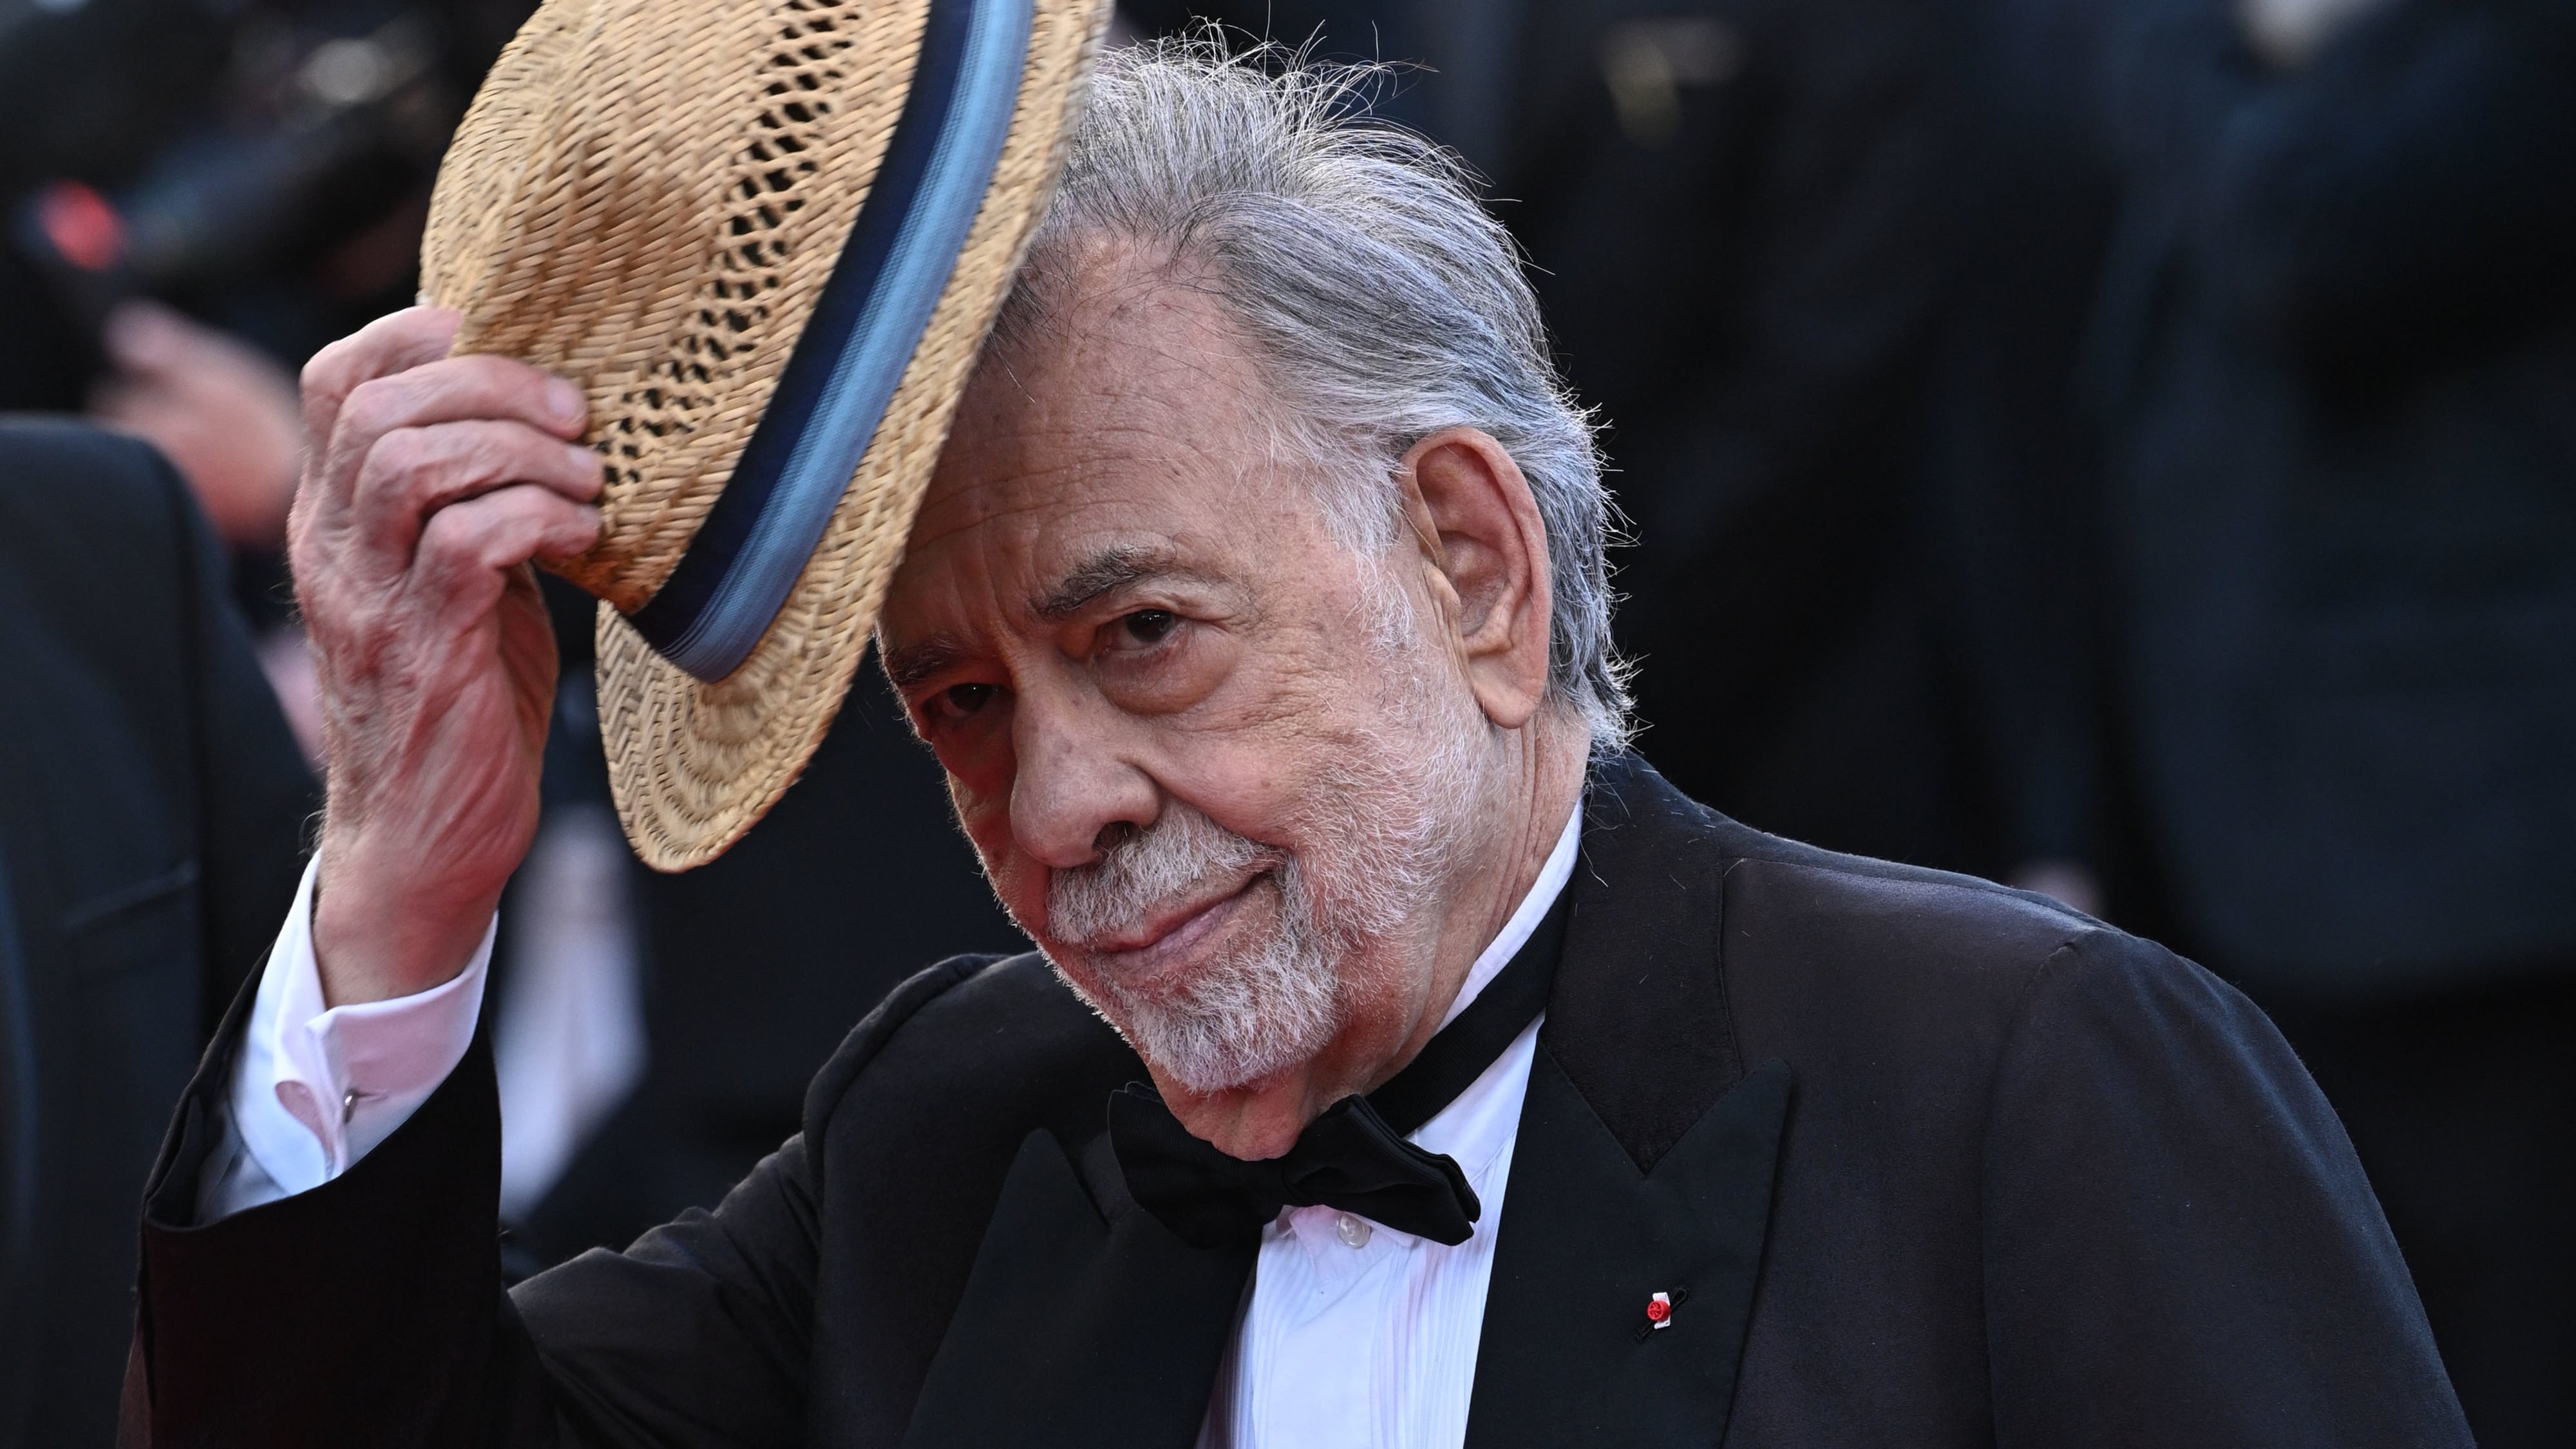 Francis Ford Coppola attends the Megalopolis premiere during the 77th Cannes Film Festival in Cannes